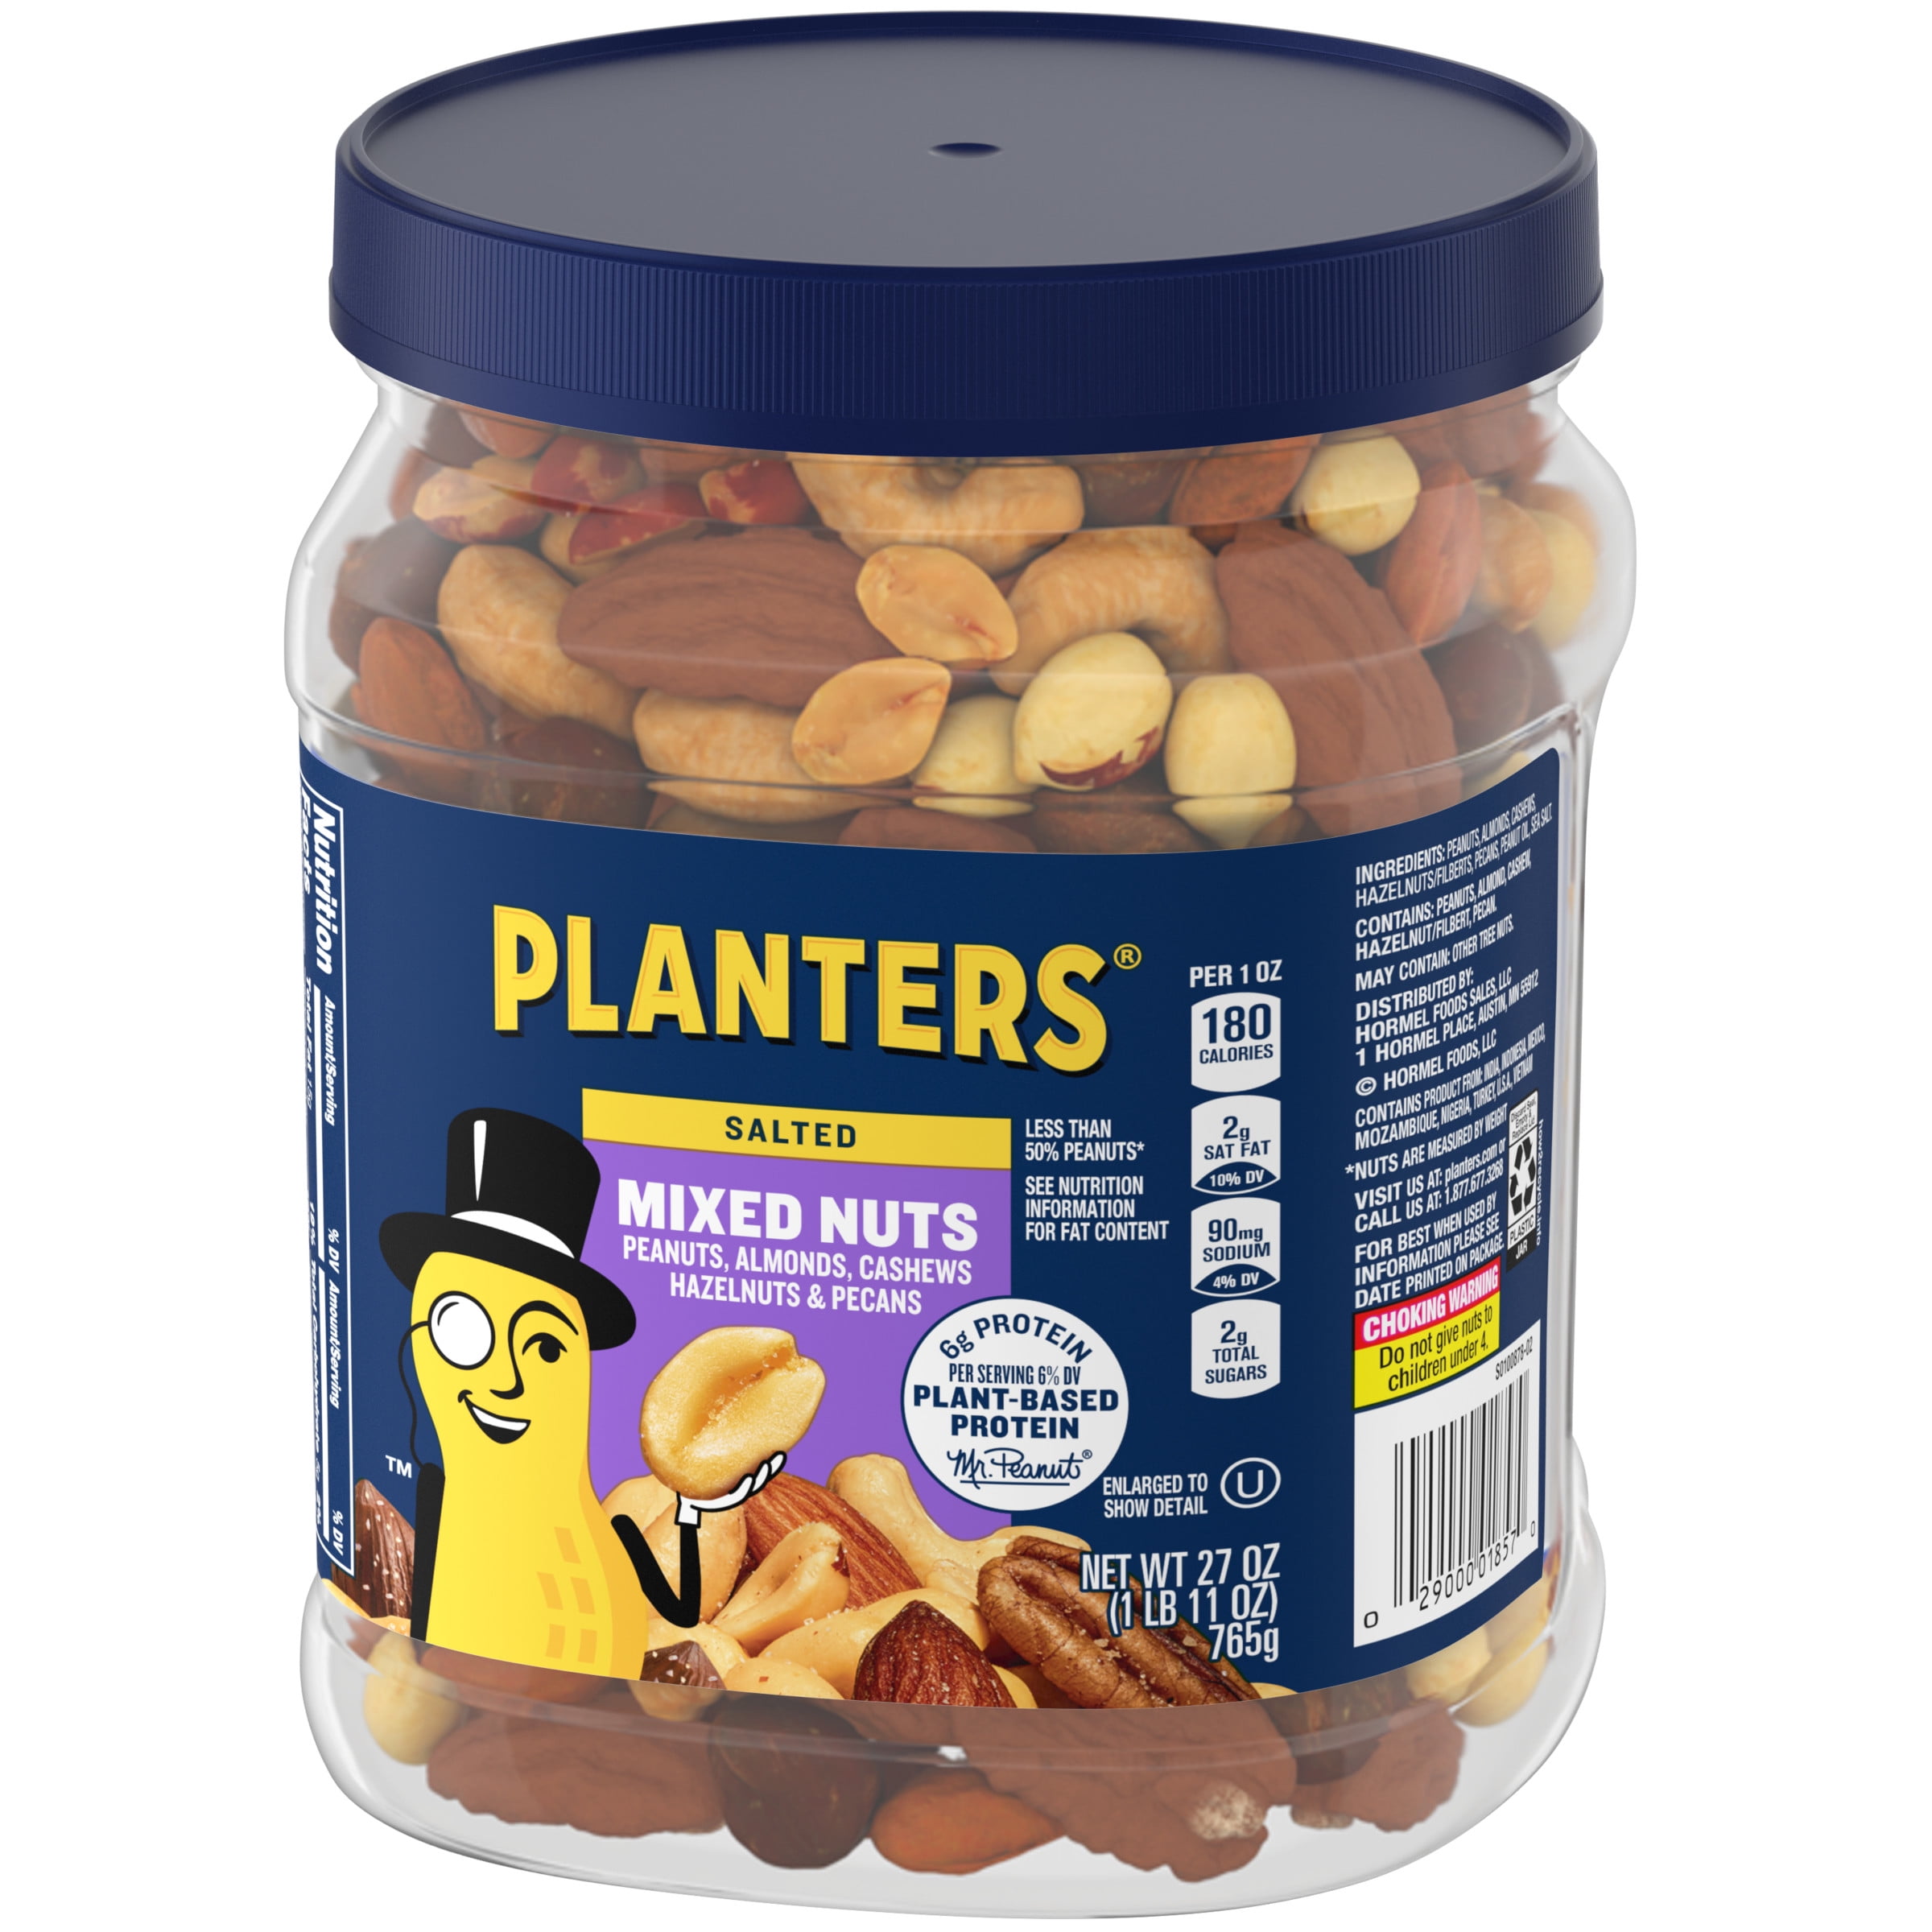 PLANTERS Salted Mixed Nuts, Party Snacks, Plant-Based Protein, 27